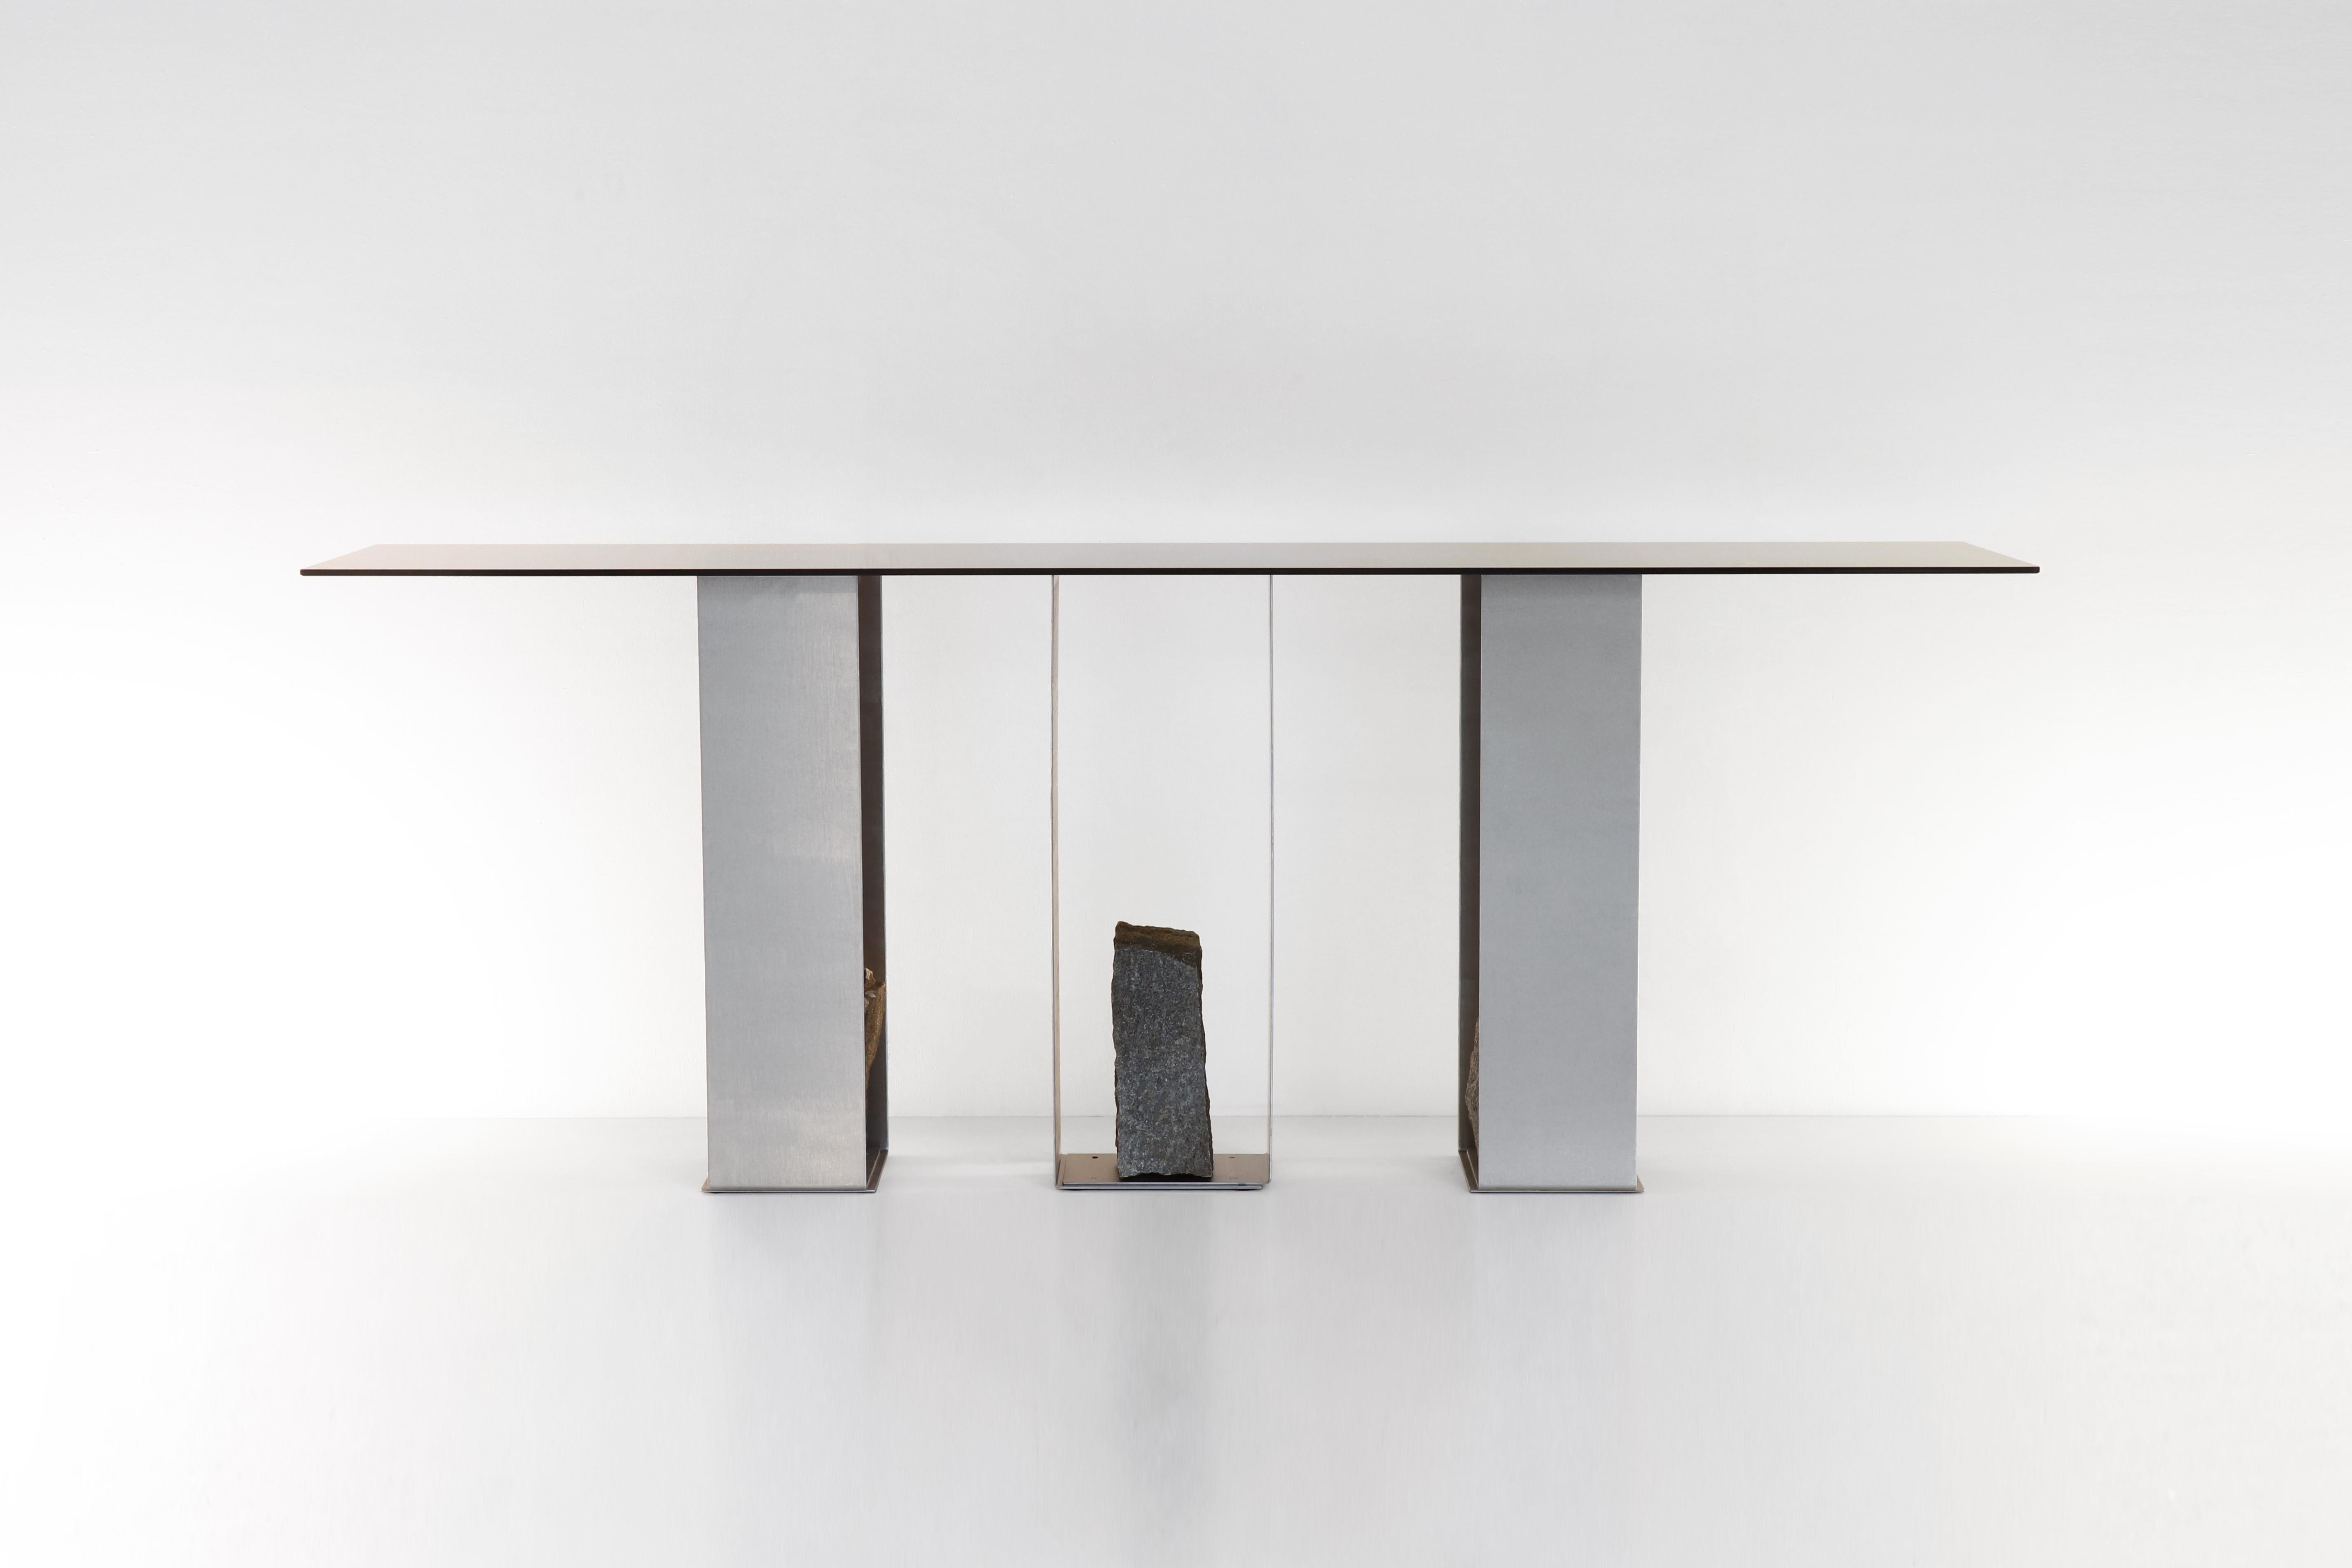 Steel and stone console table by Batten and Kamp
2020
Shelter to Ground Collection
Dimensions: Top: W 190 x D 50 cm
Console base: W 108 x D 24 x H 72 cm
Materials: Hand finished stainless steel, tinted glass, natural stone

Top can be custom to any